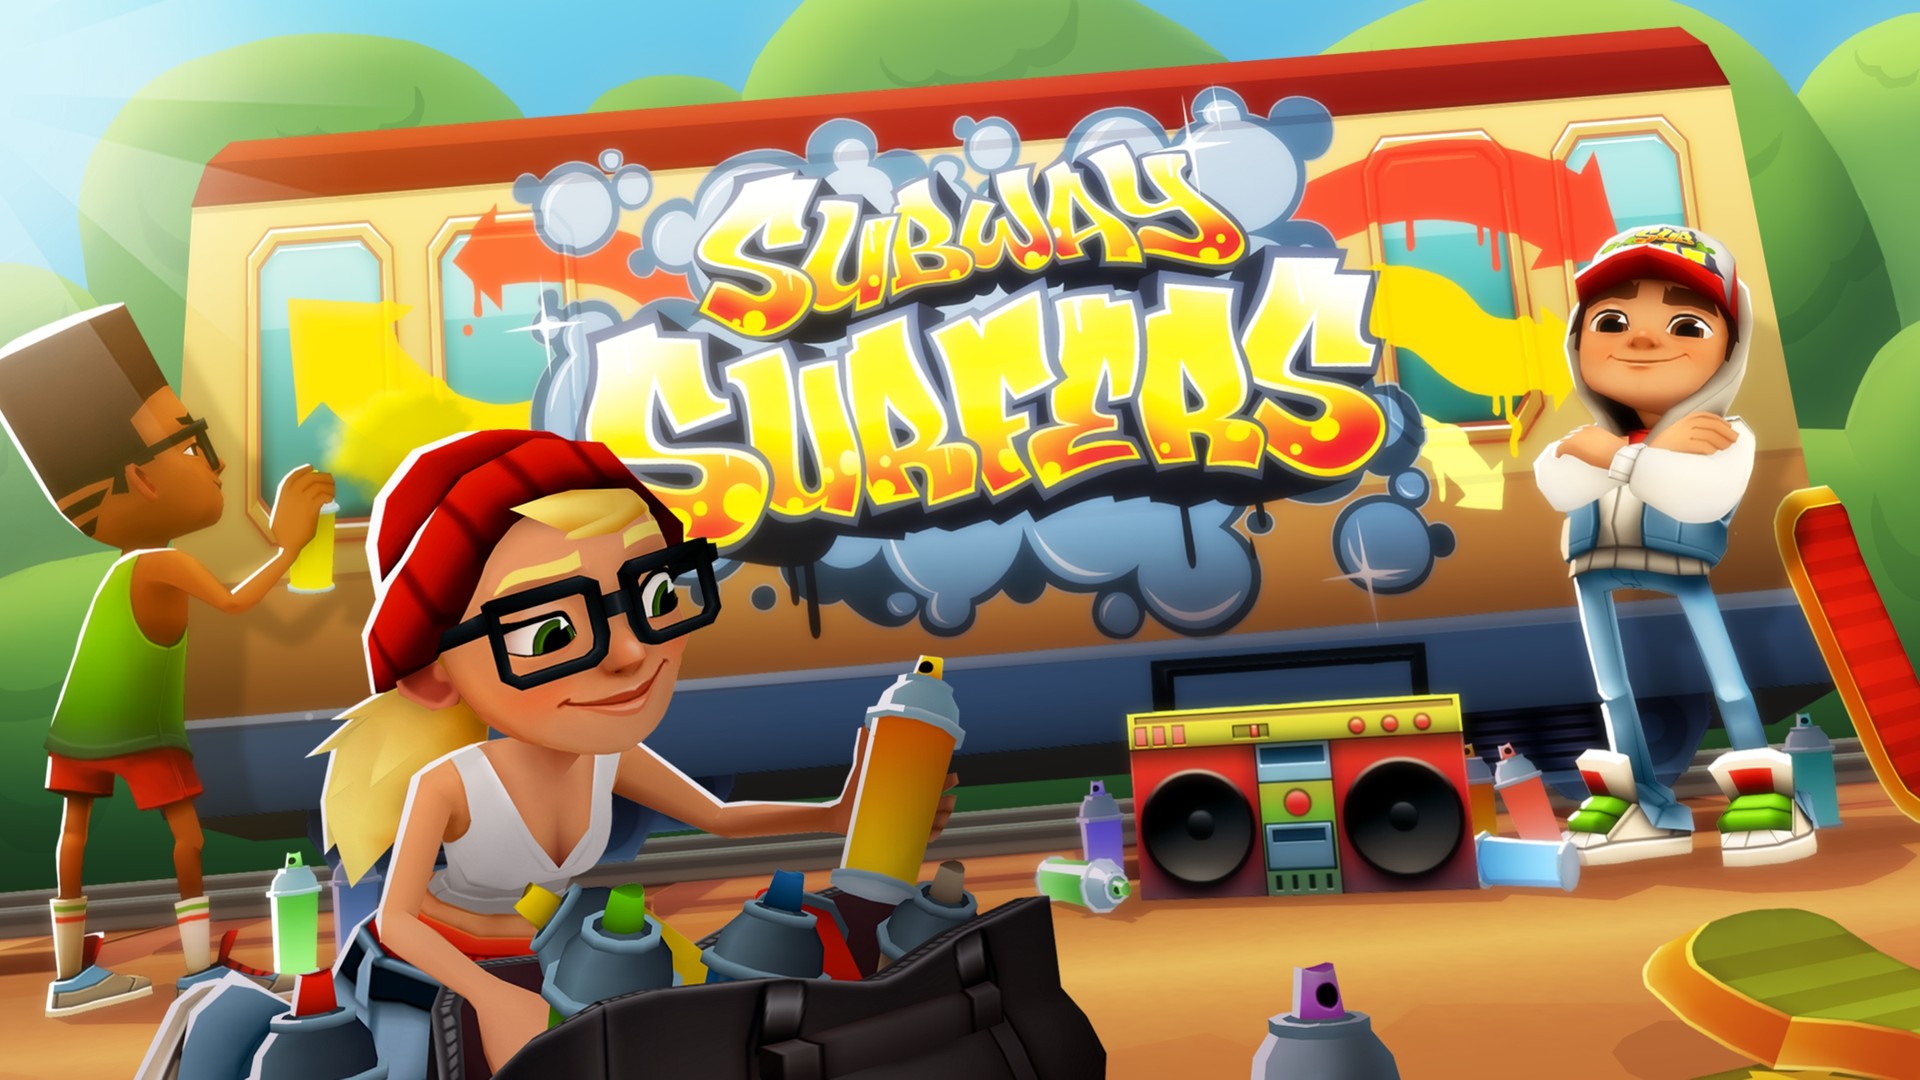 Download Subway Surfers for android 9.0